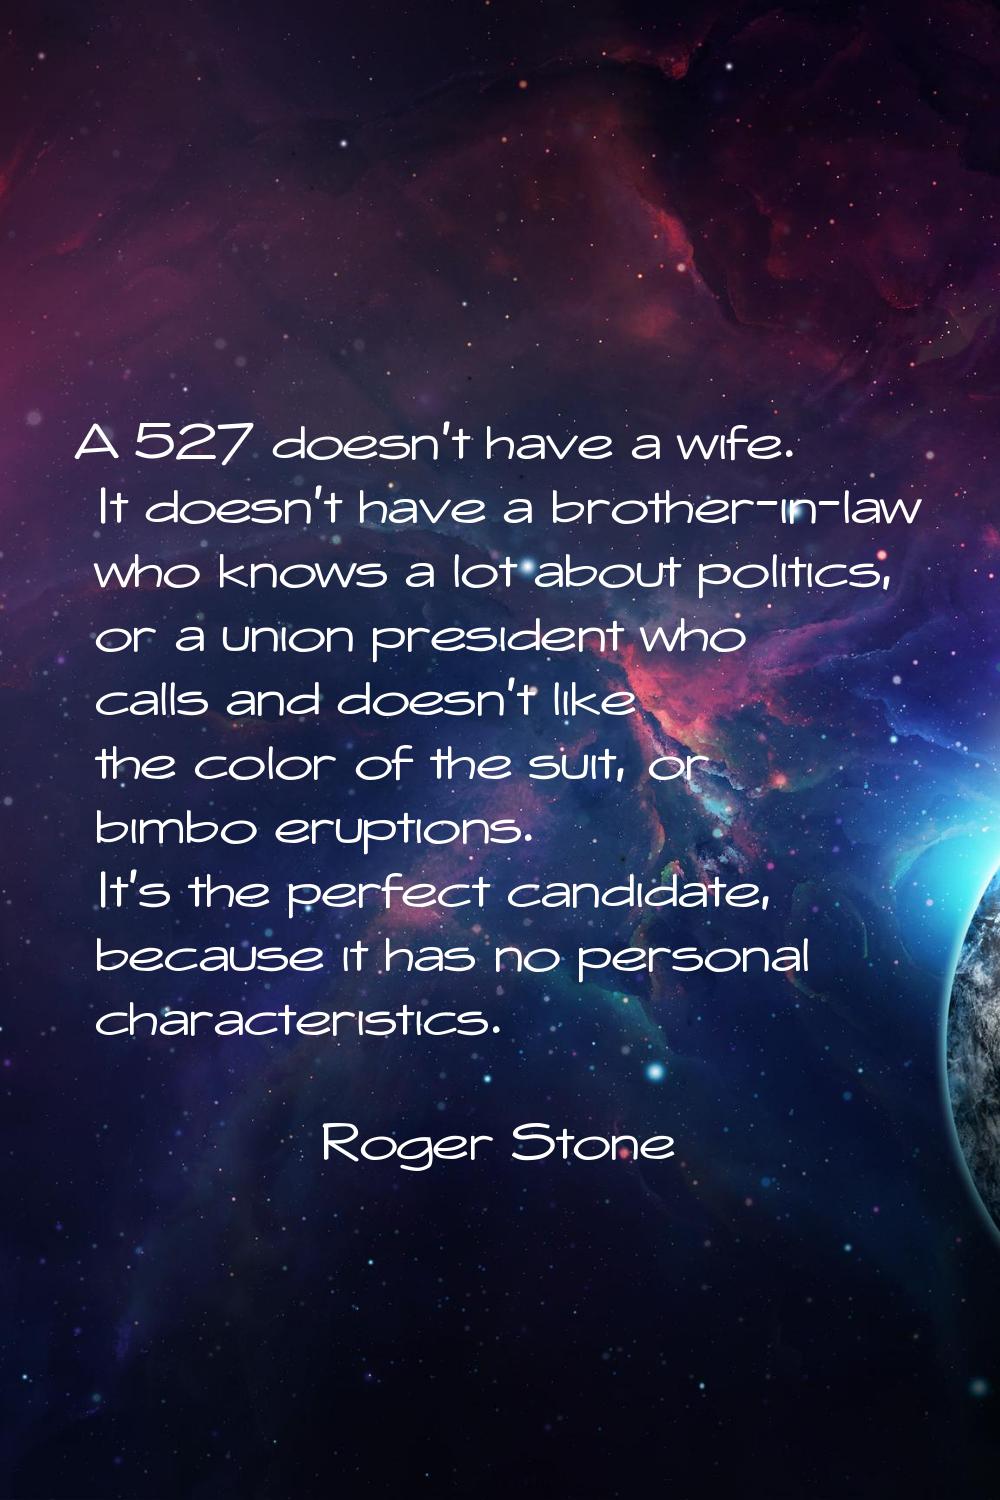 A 527 doesn't have a wife. It doesn't have a brother-in-law who knows a lot about politics, or a un